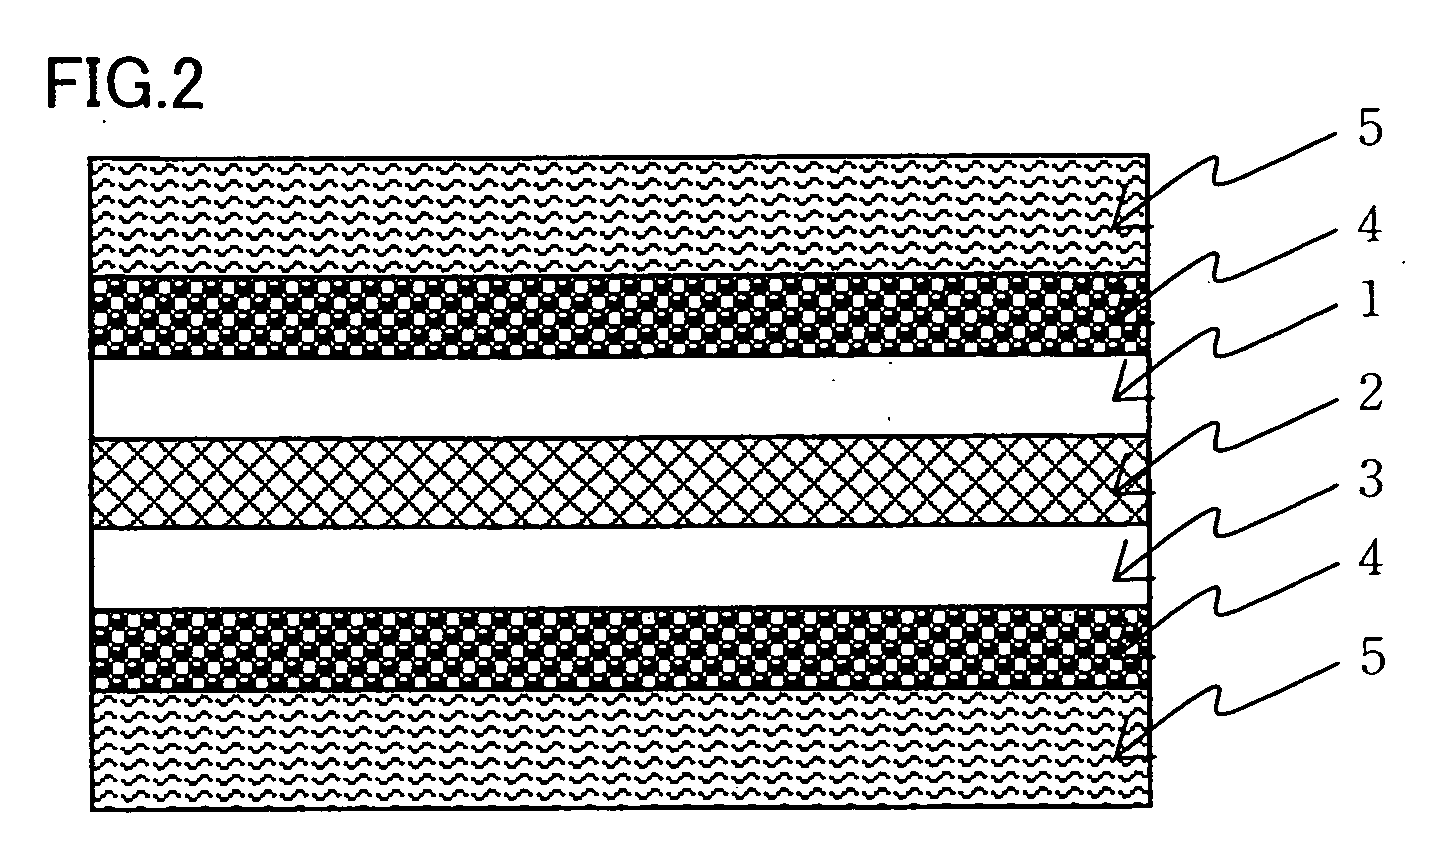 Cluster ion exchange membrane and electrolyte membrane electrode connection body